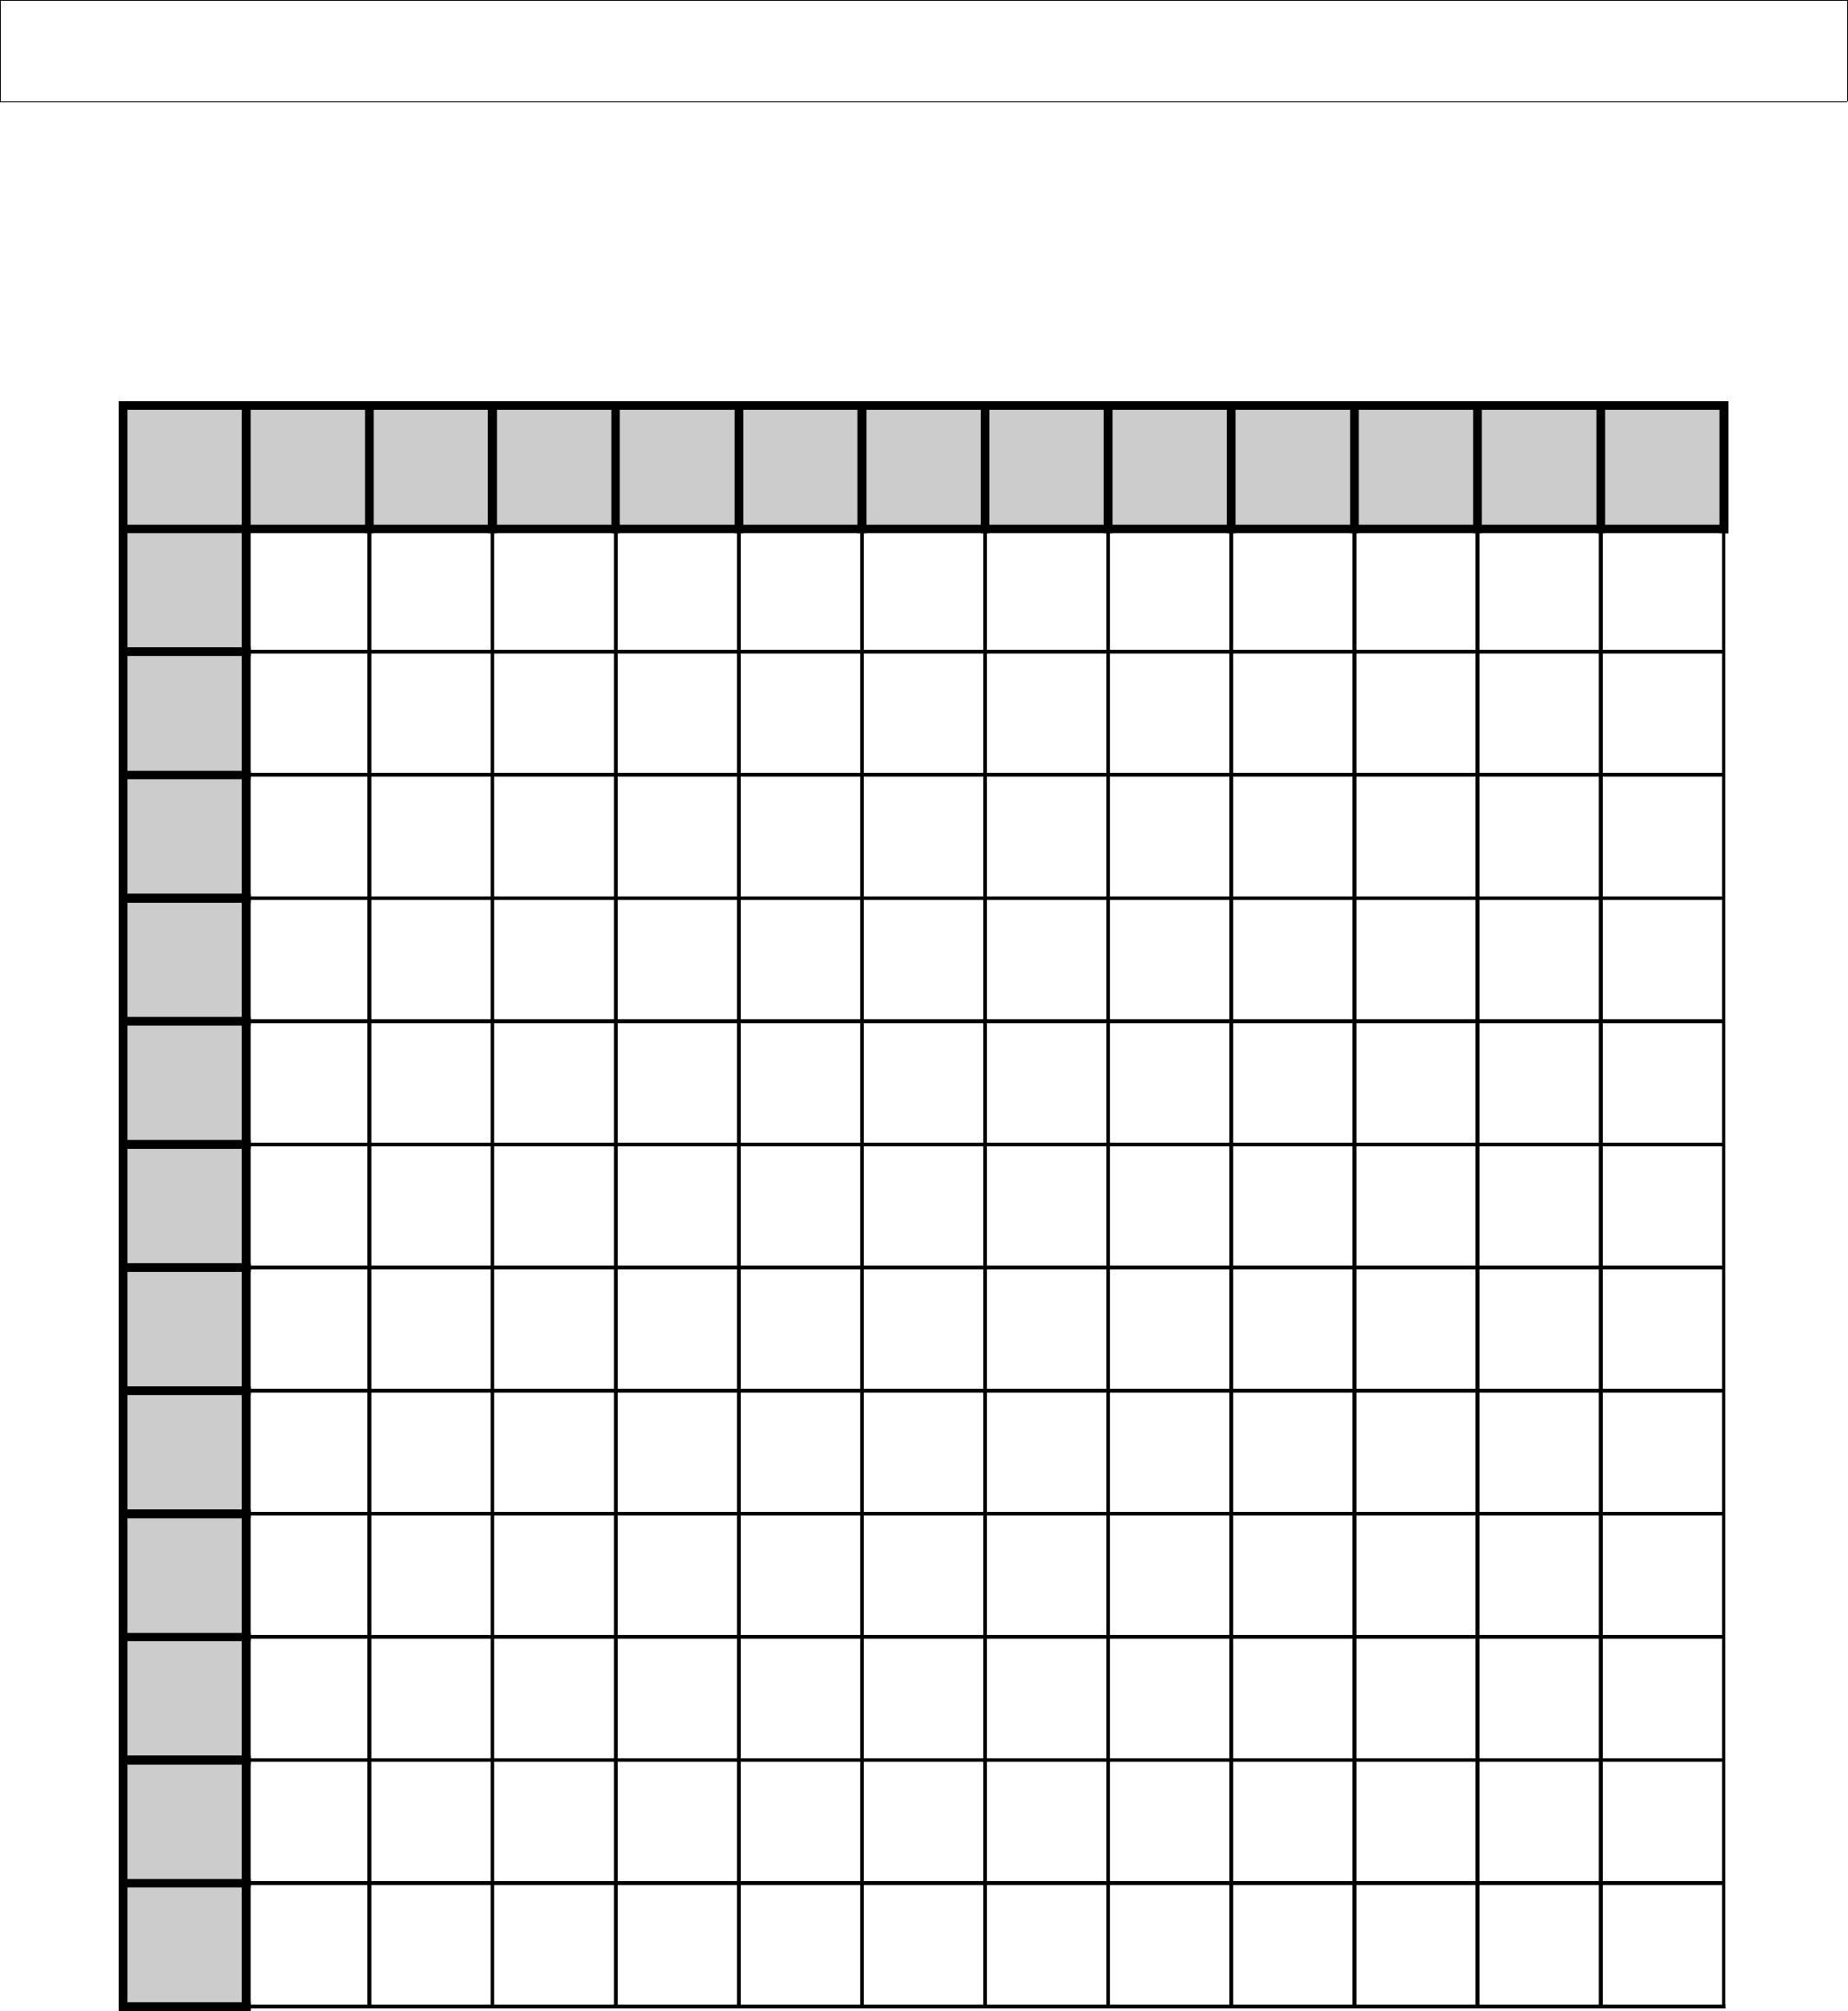 Multiplication Table Chart Fill In